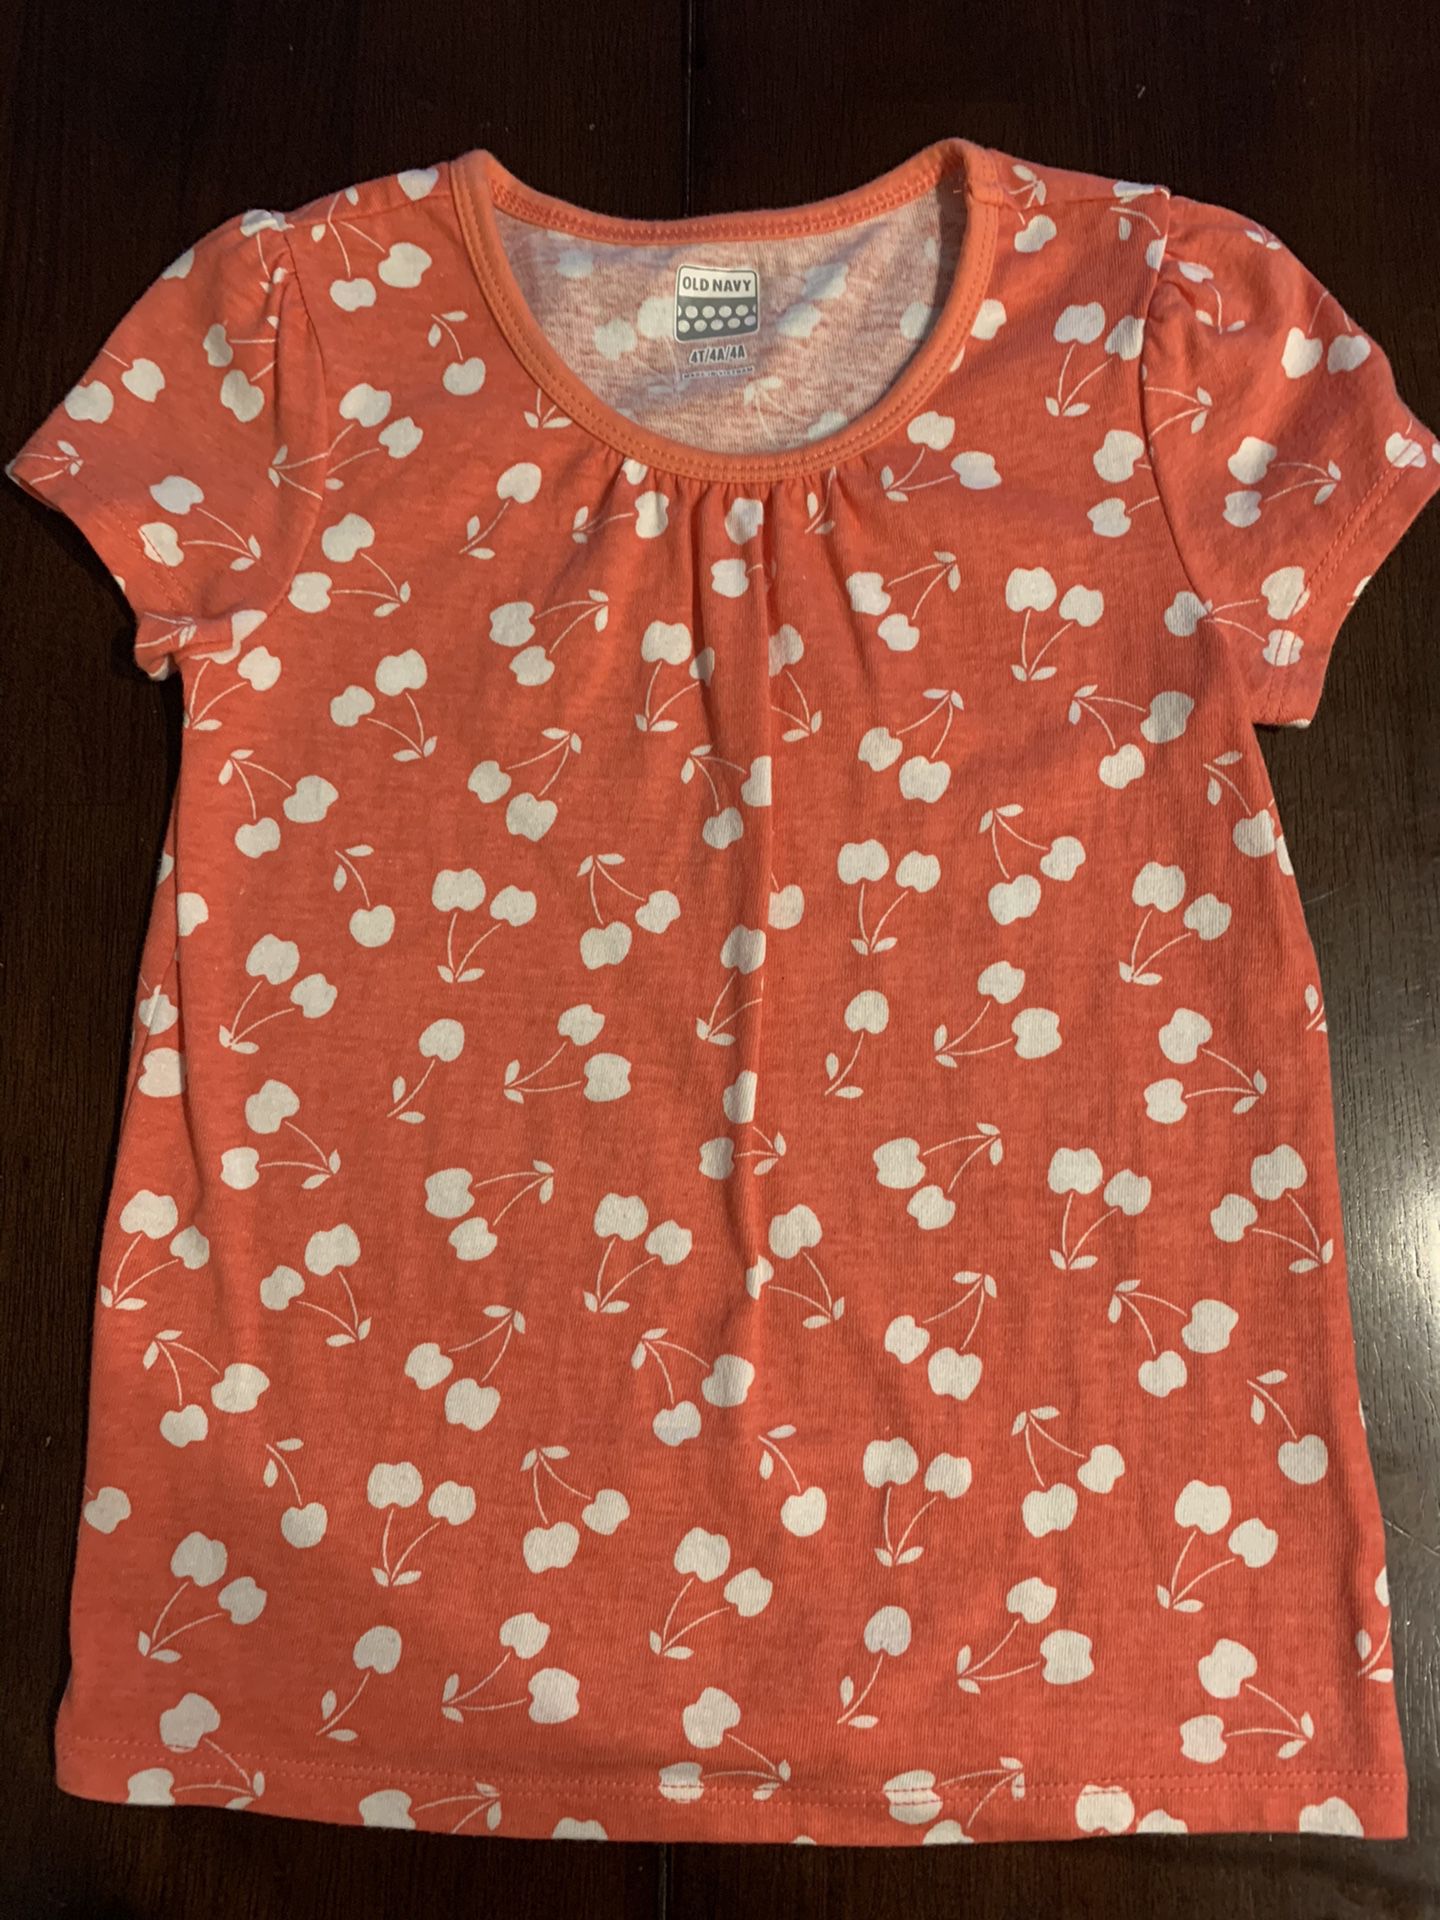 Girls old navy T-shirt - size 4T